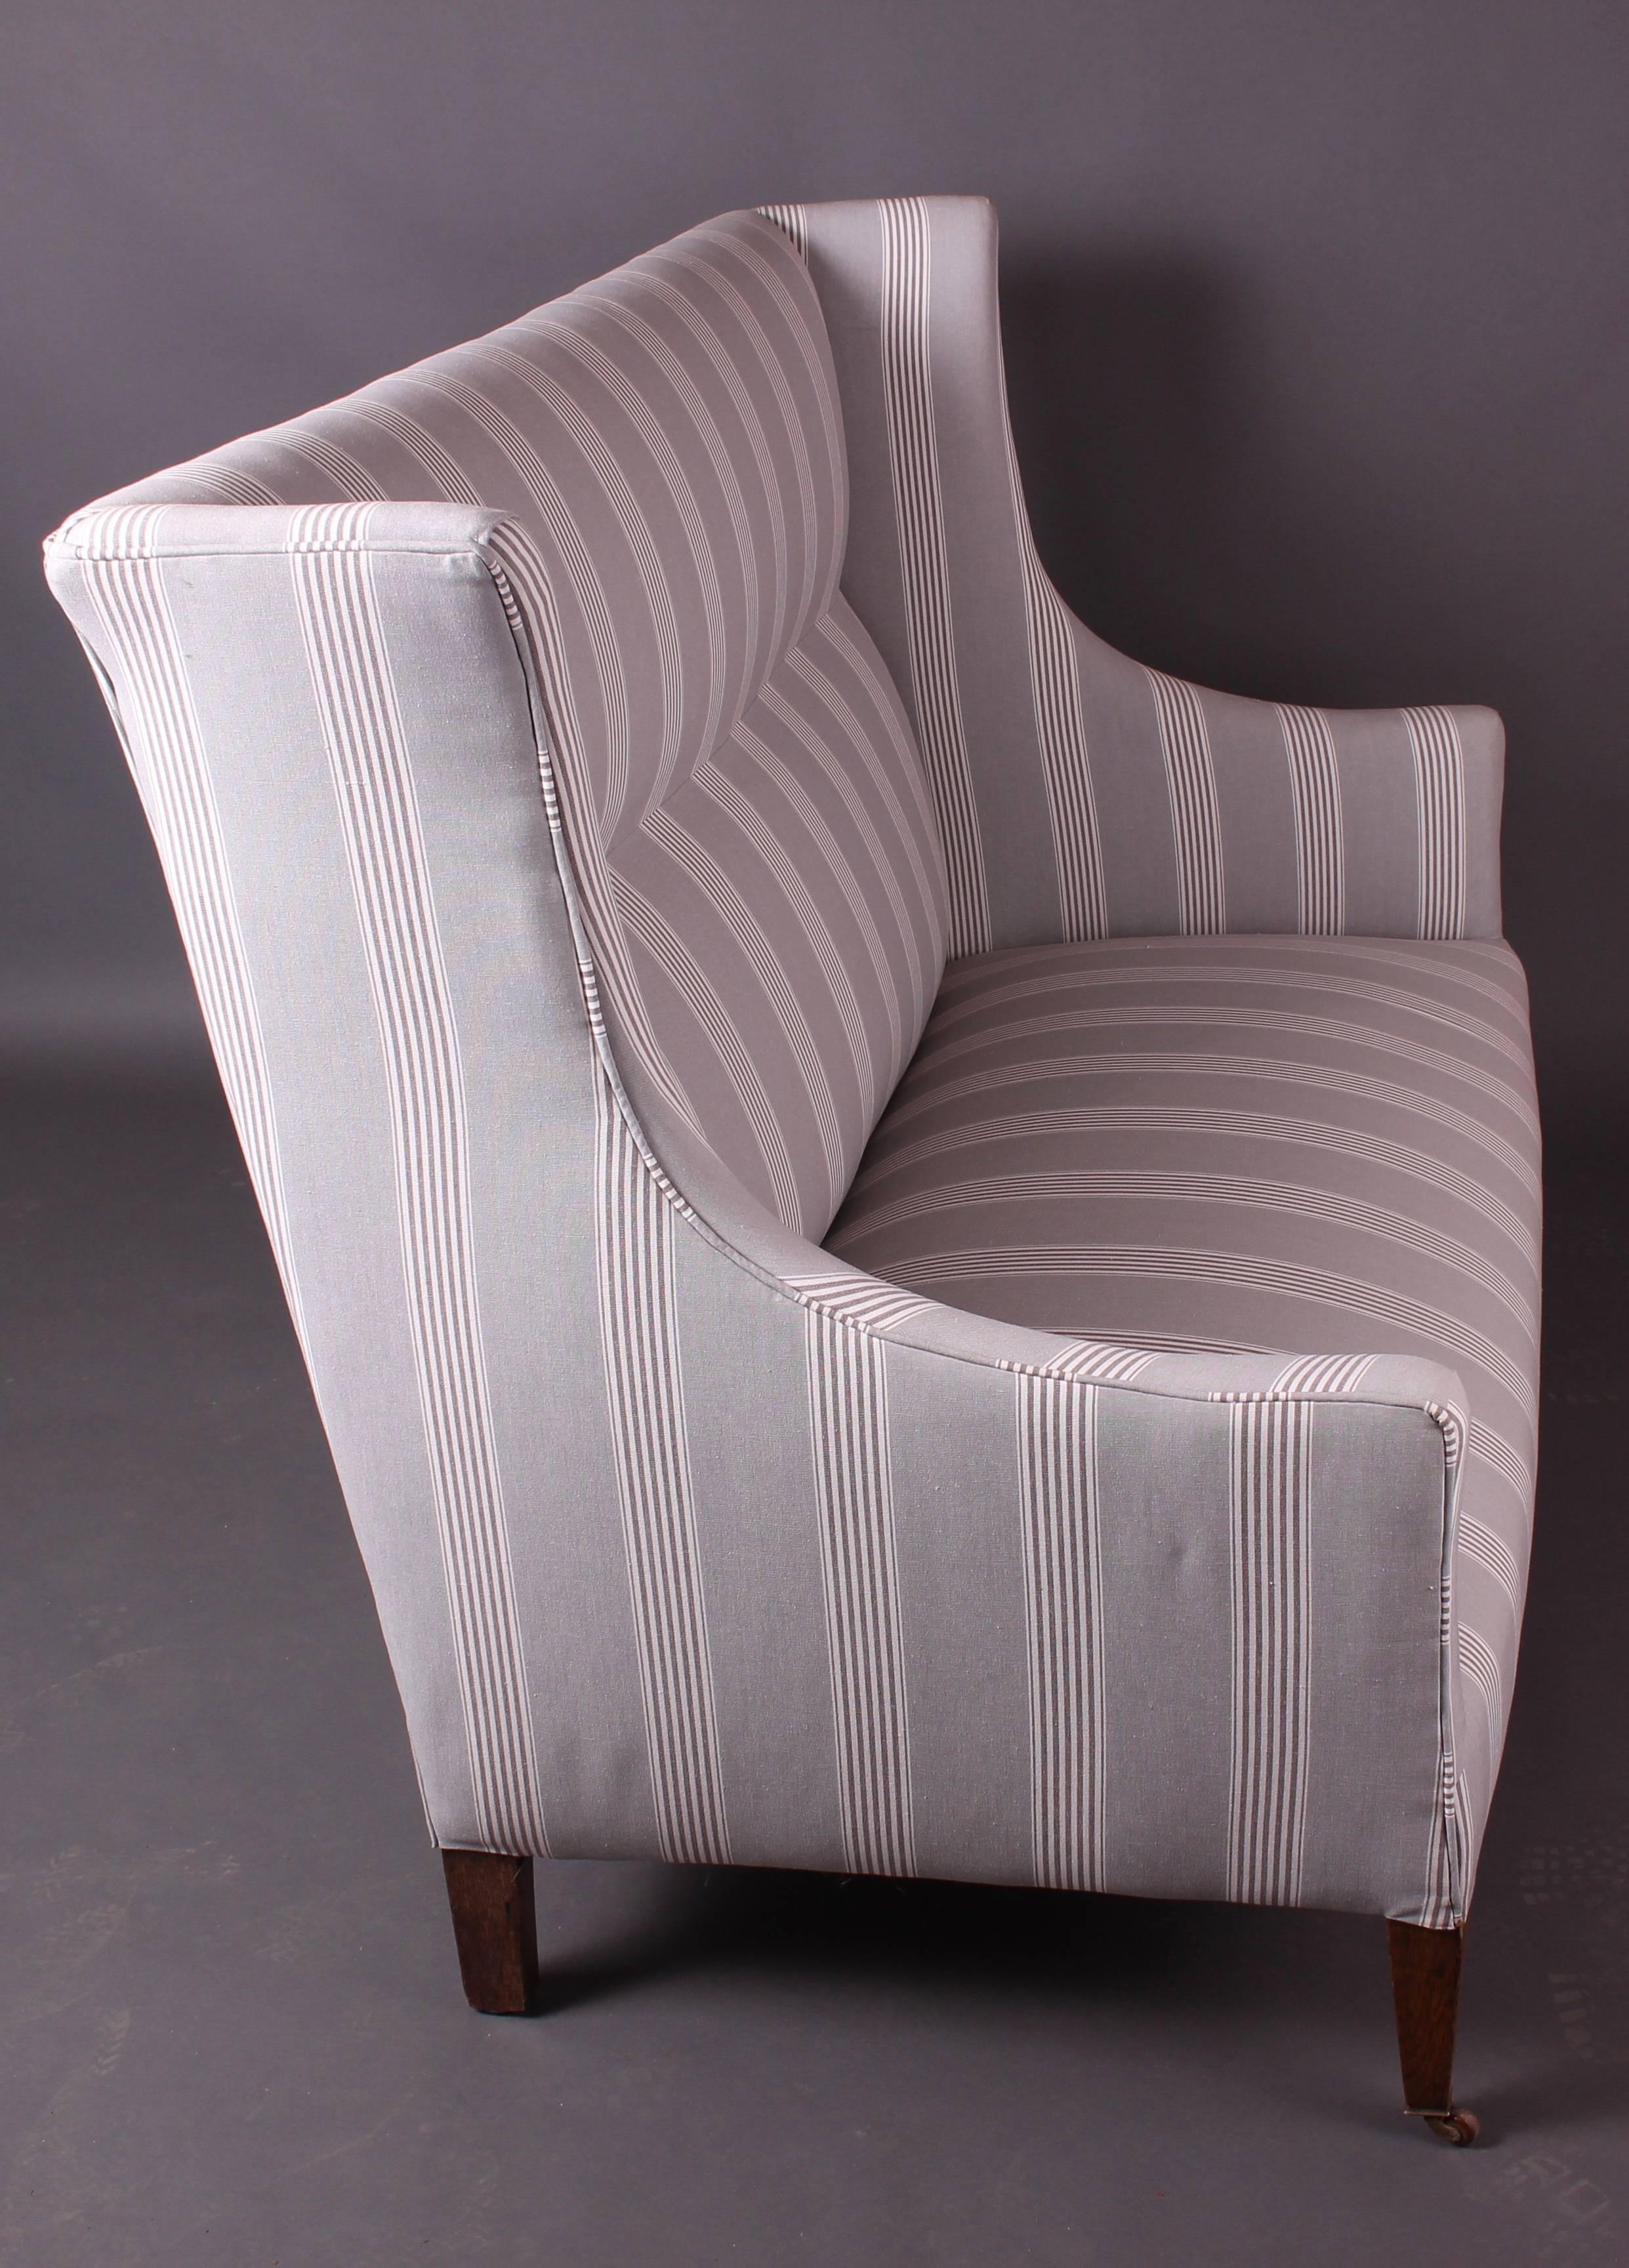 Early 20th Century Edwardian Wingback Sofa Settee in a French Grey Stripe Fabric